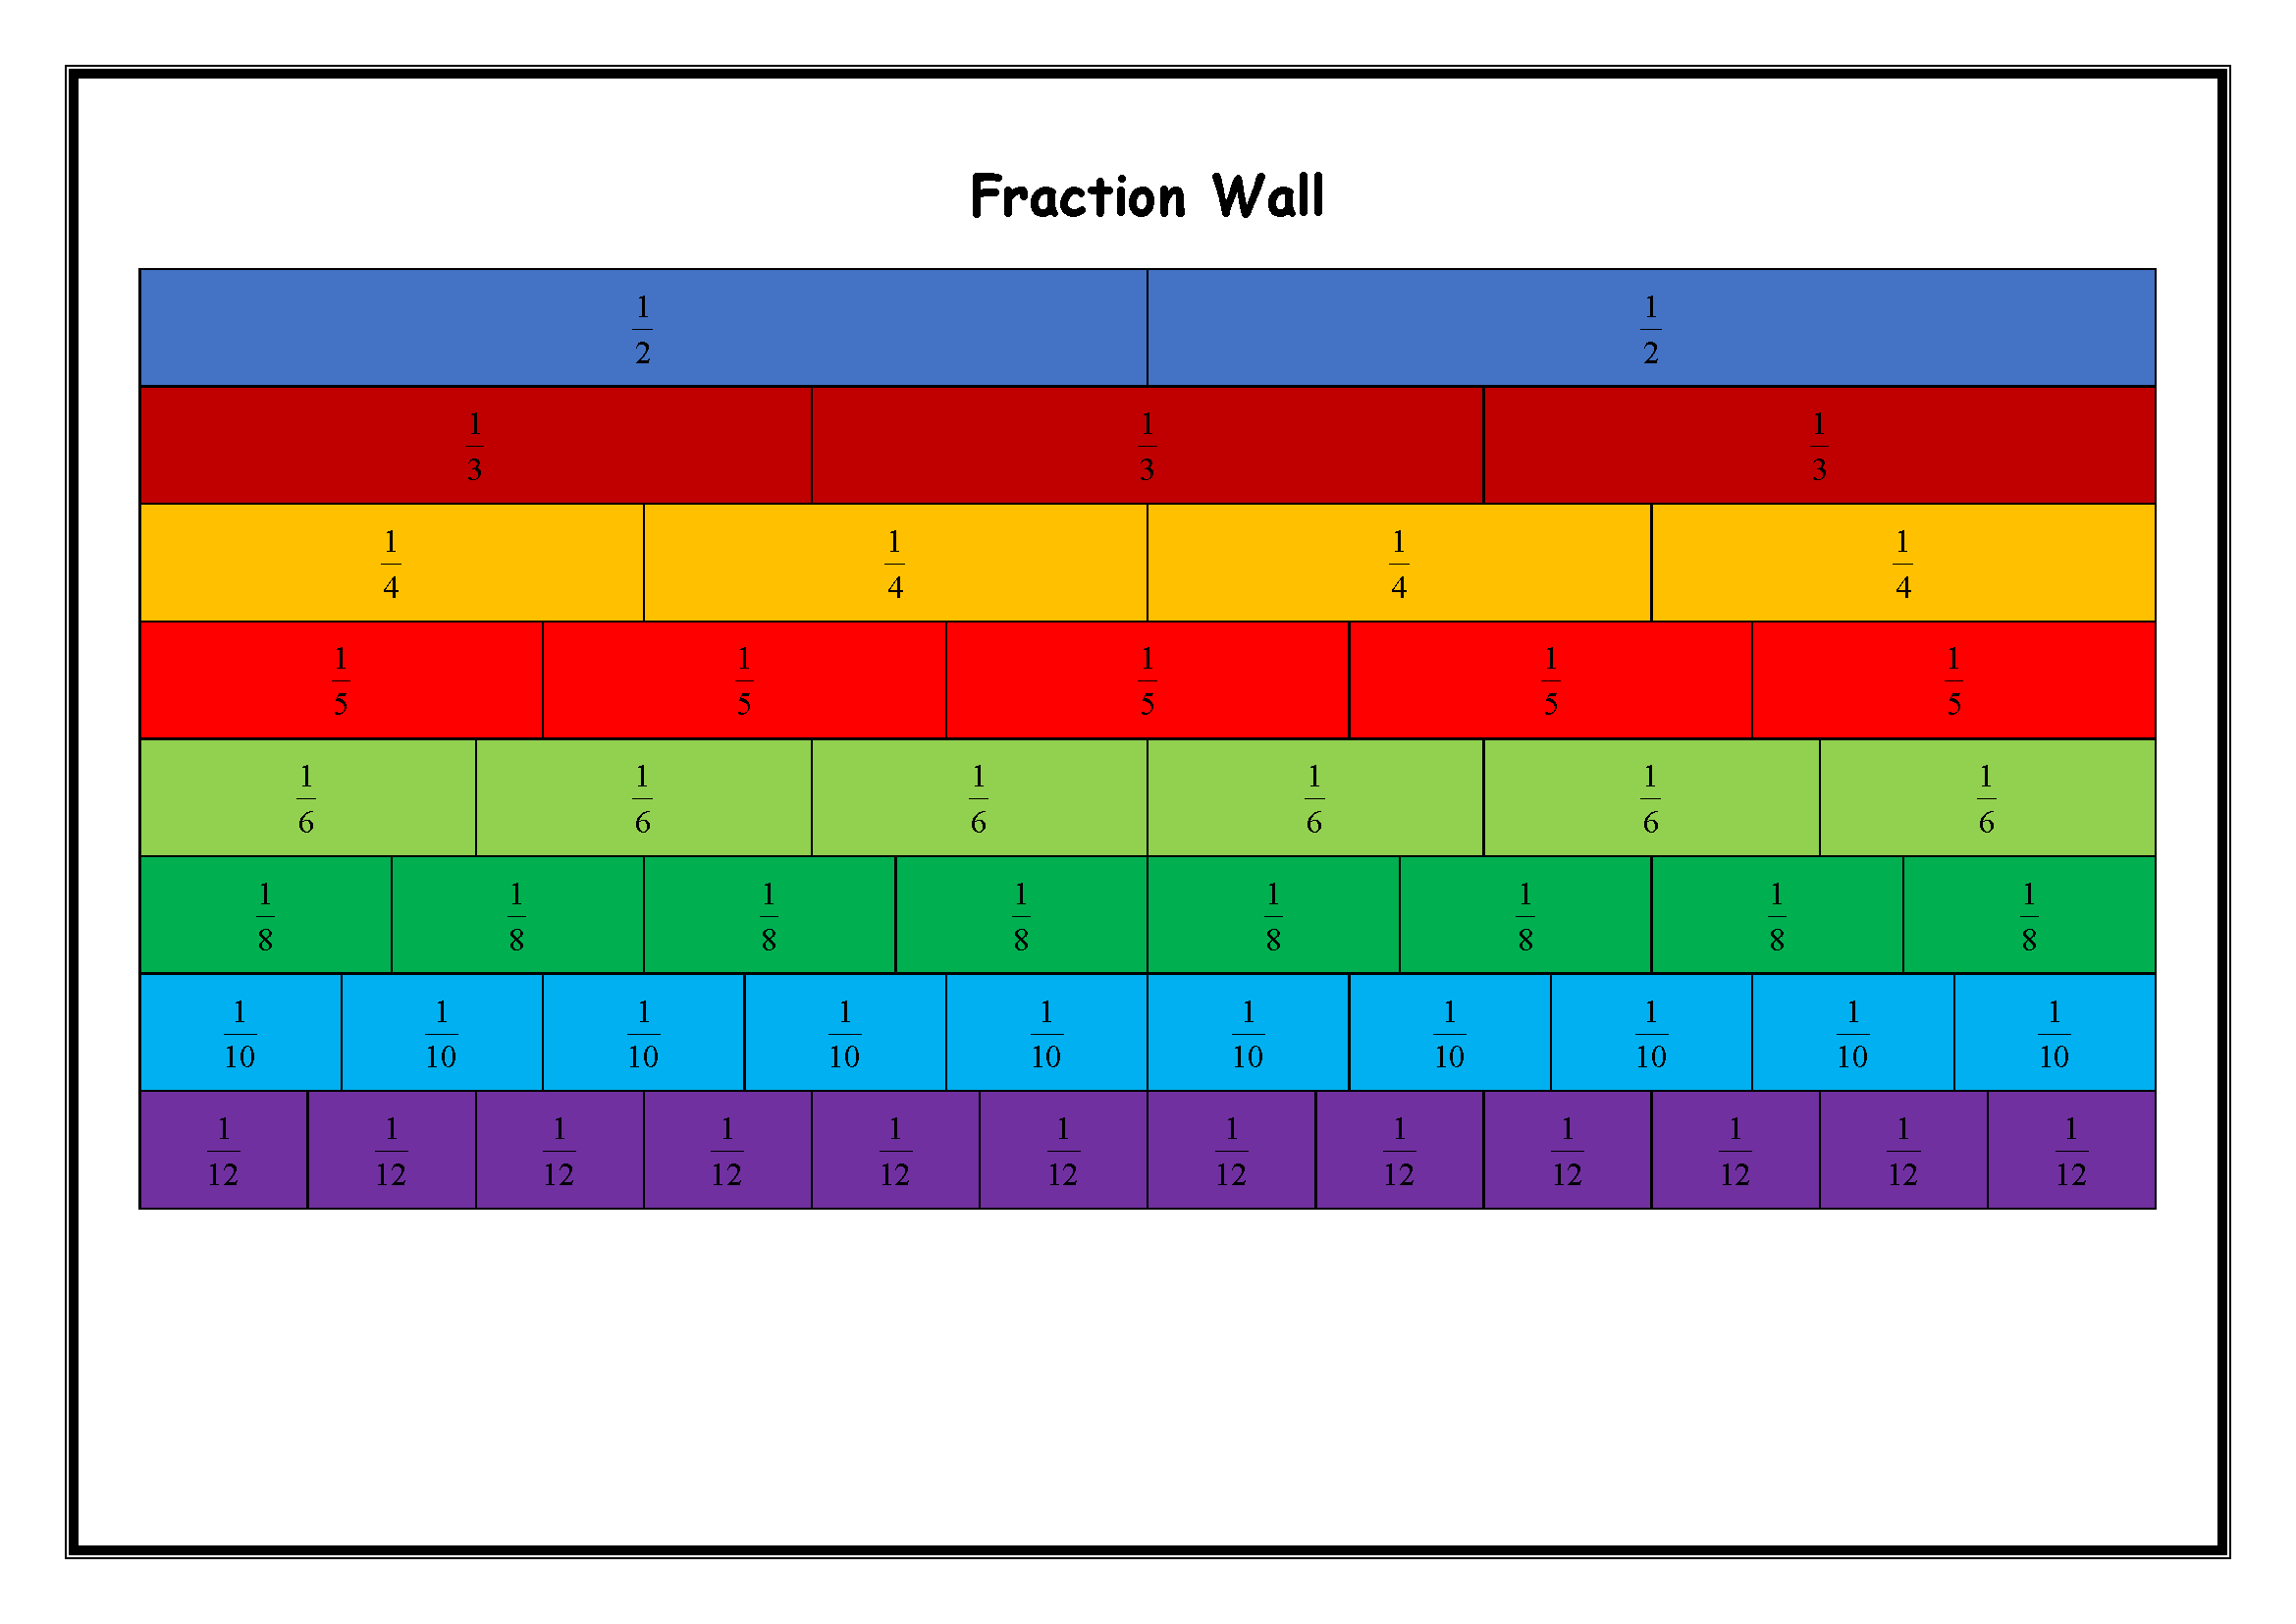 Fractions wall - part of year 4 maths